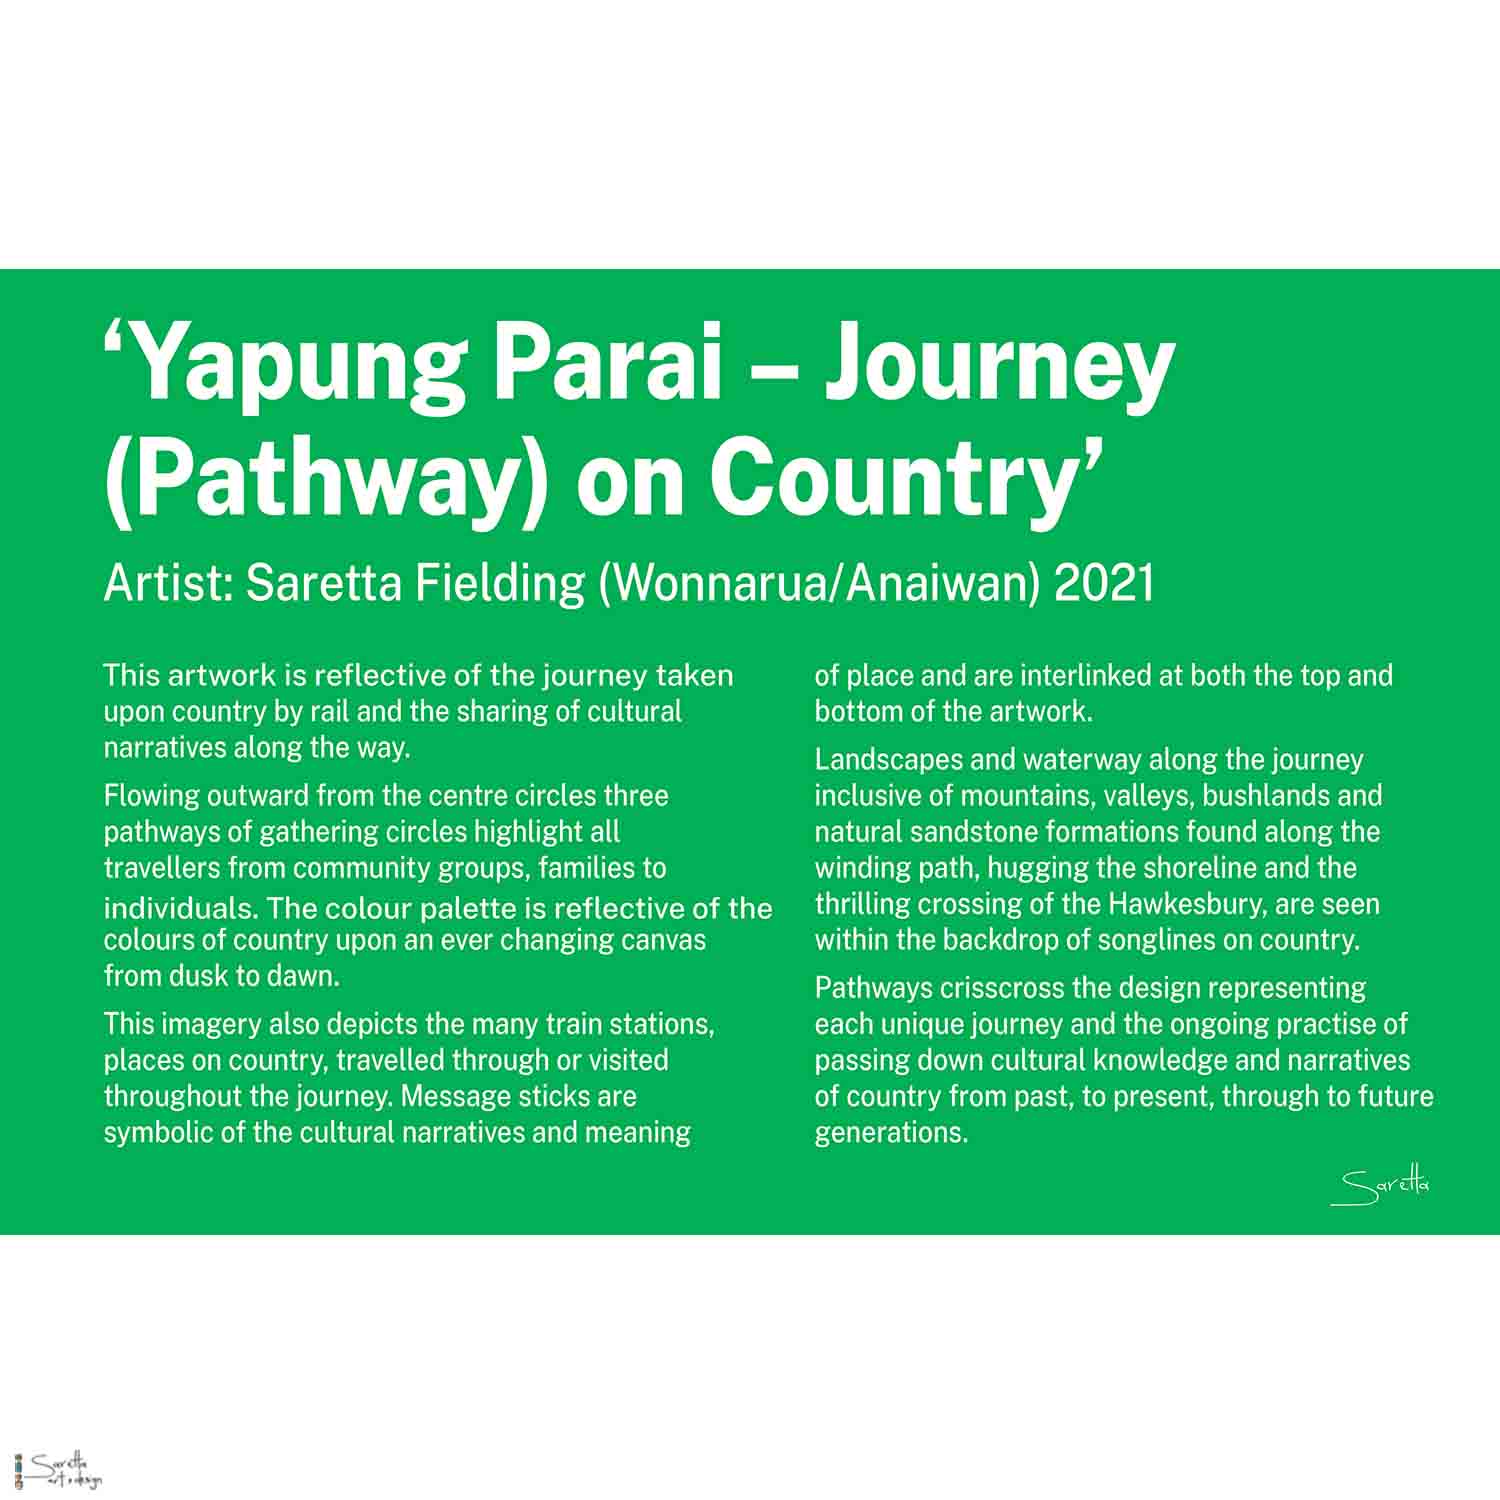 Transport for NSW, Yapung Parai – Journey on Country